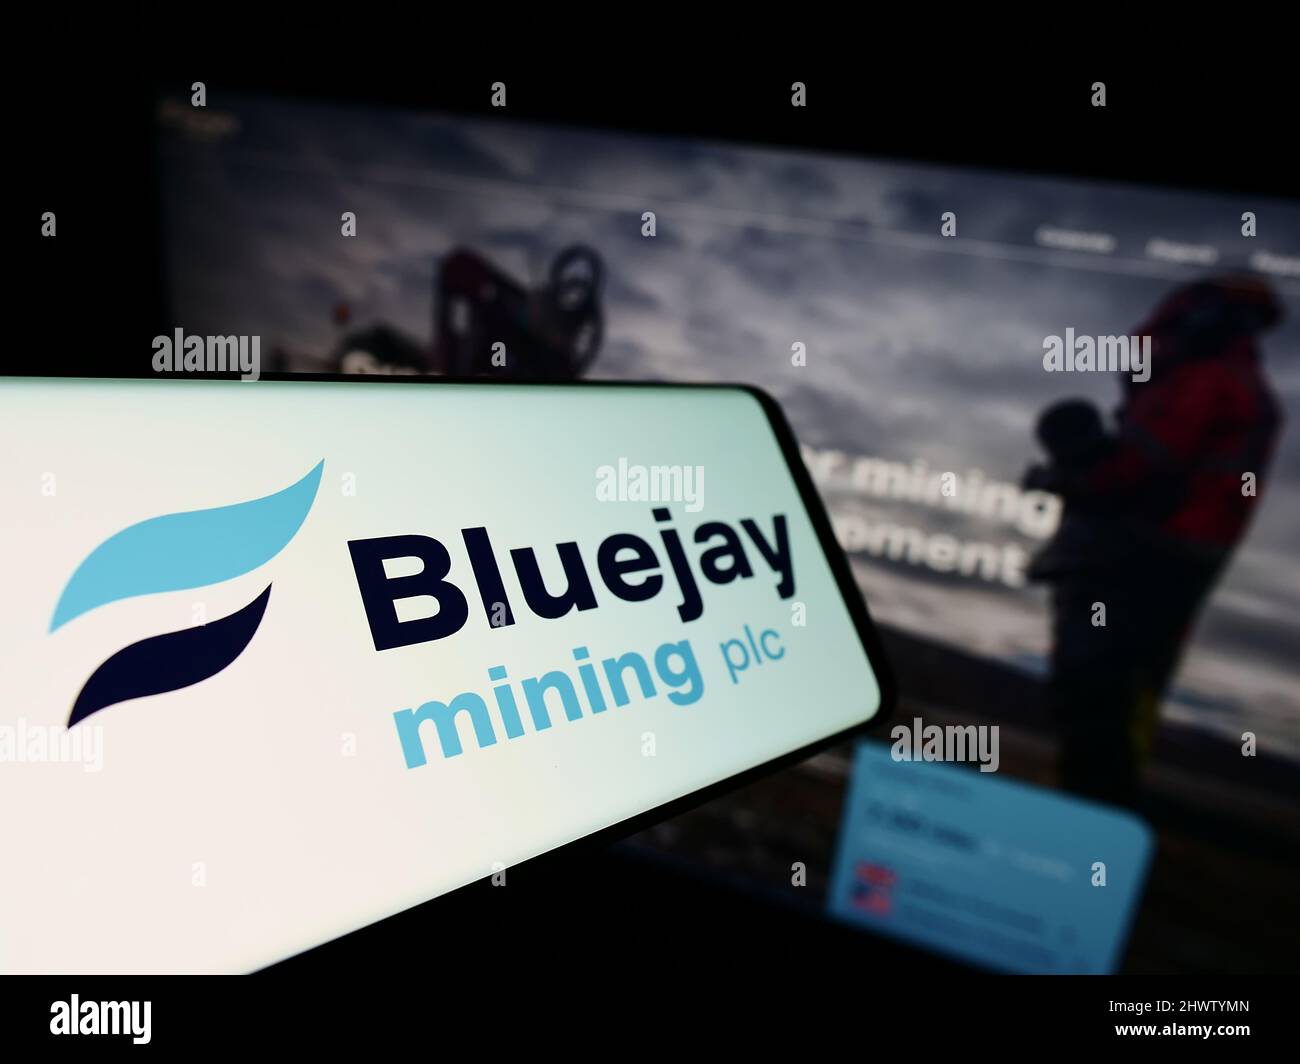 Smartphone with logo of British company Bluejay Mining plc on screen in front of business website. Focus on center-left of phone display. Stock Photo